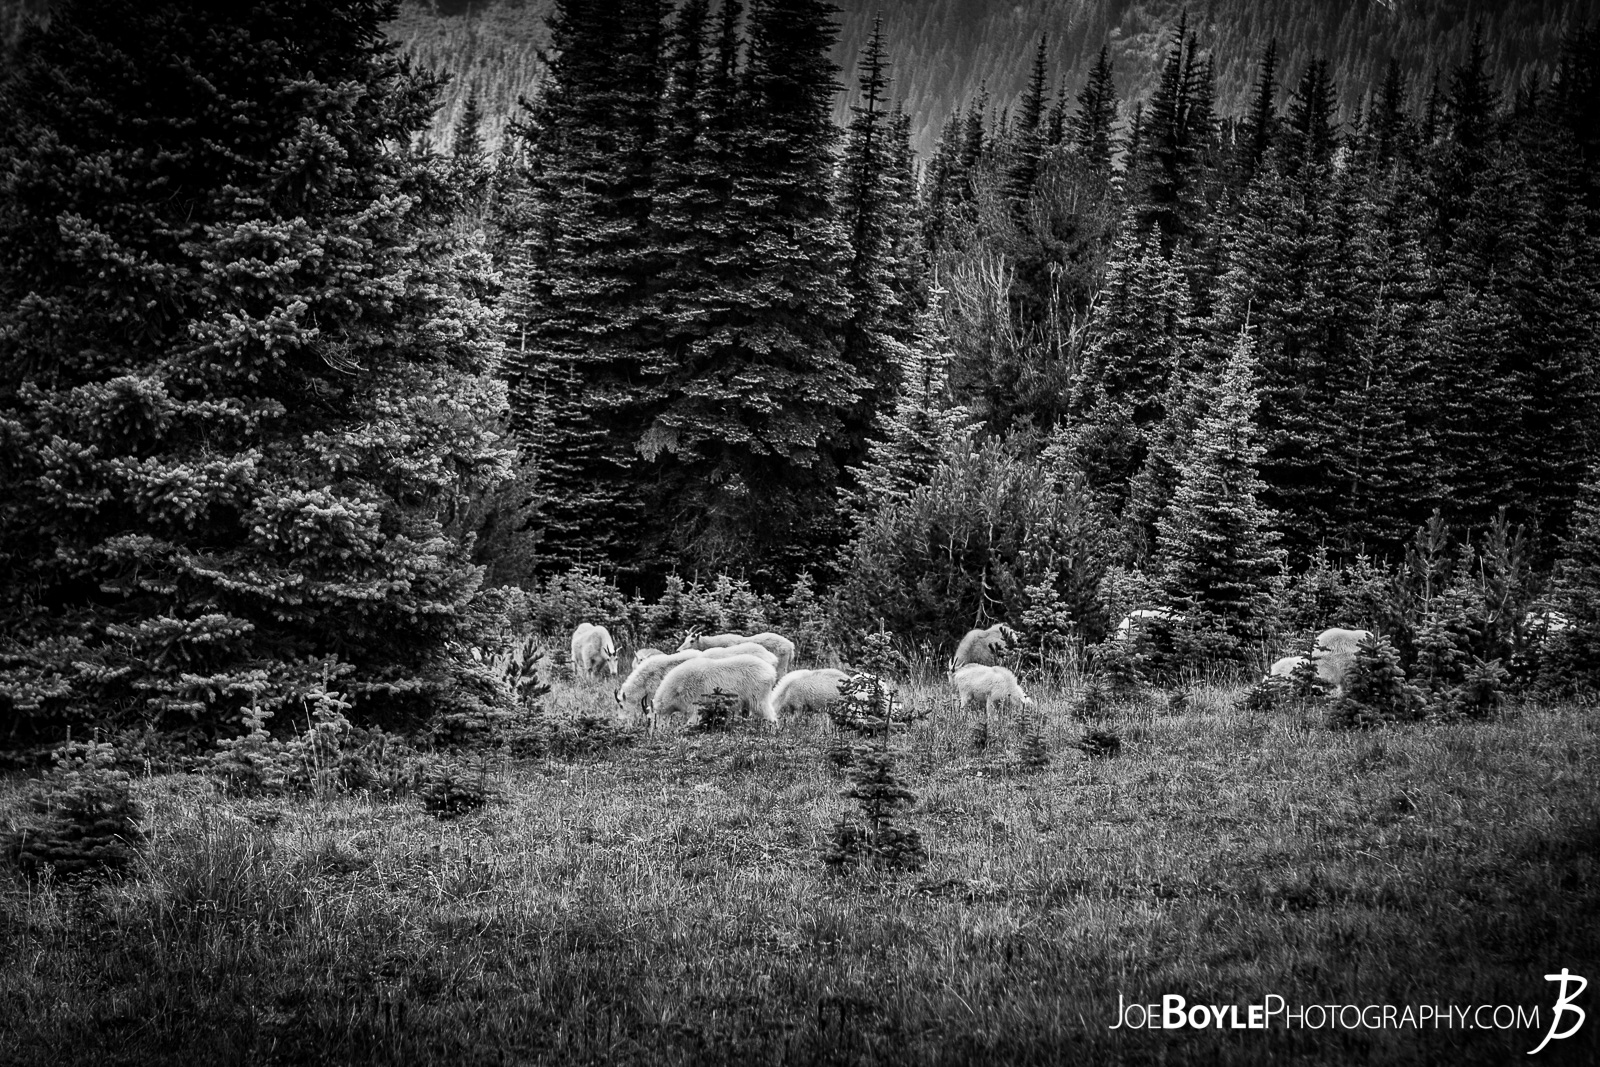  On our hike of the Wonderland Trail we encountered this herd of goats just a short distance from the trail. We were on our way to Panhandle Gap. 